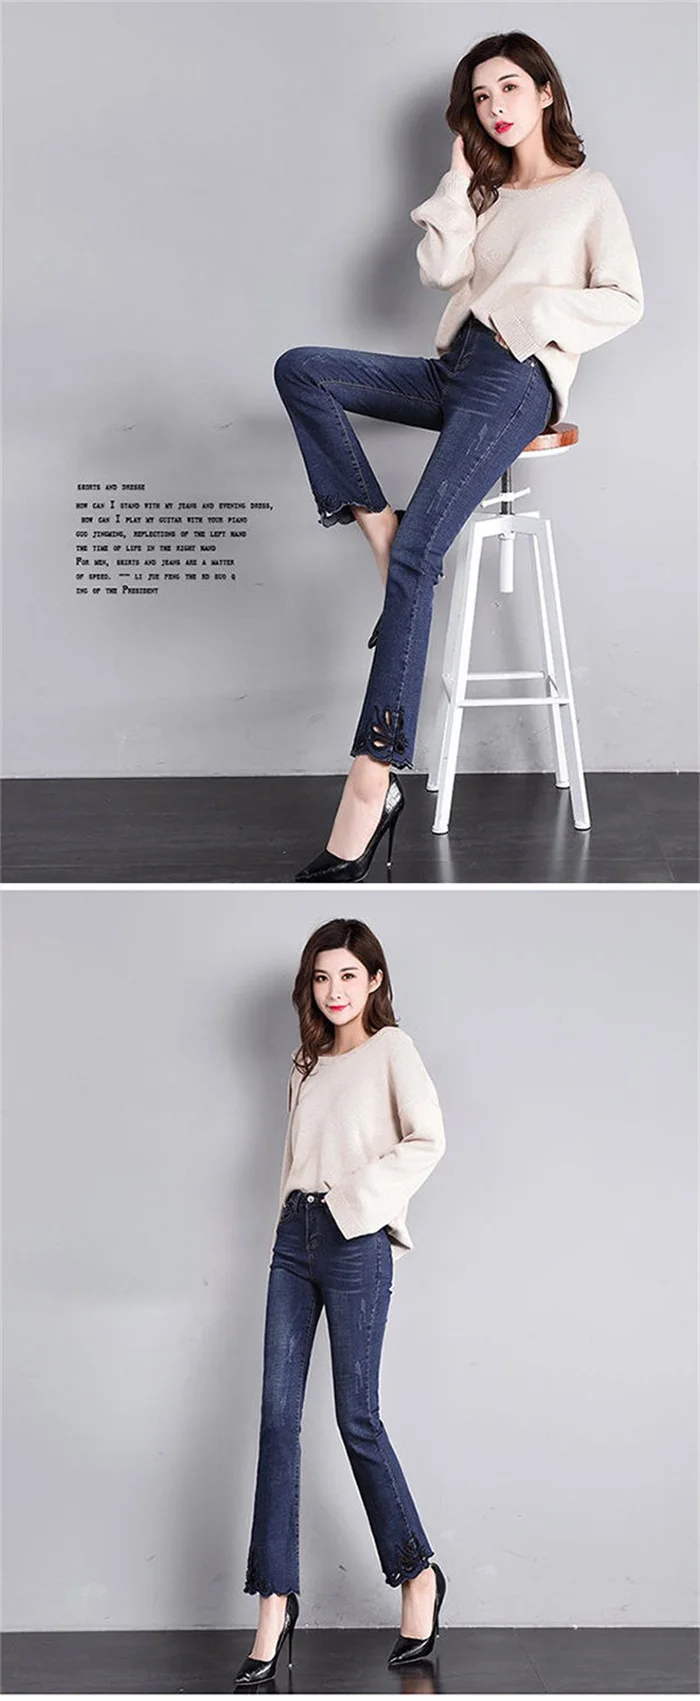 tommy jeans Chic Embroidery Flare Jeans Women Chinese Style Elegant Slim Denim Pants Ankle Length Fashion Bell-Bottomed Pants Skinny Jeans black ripped jeans